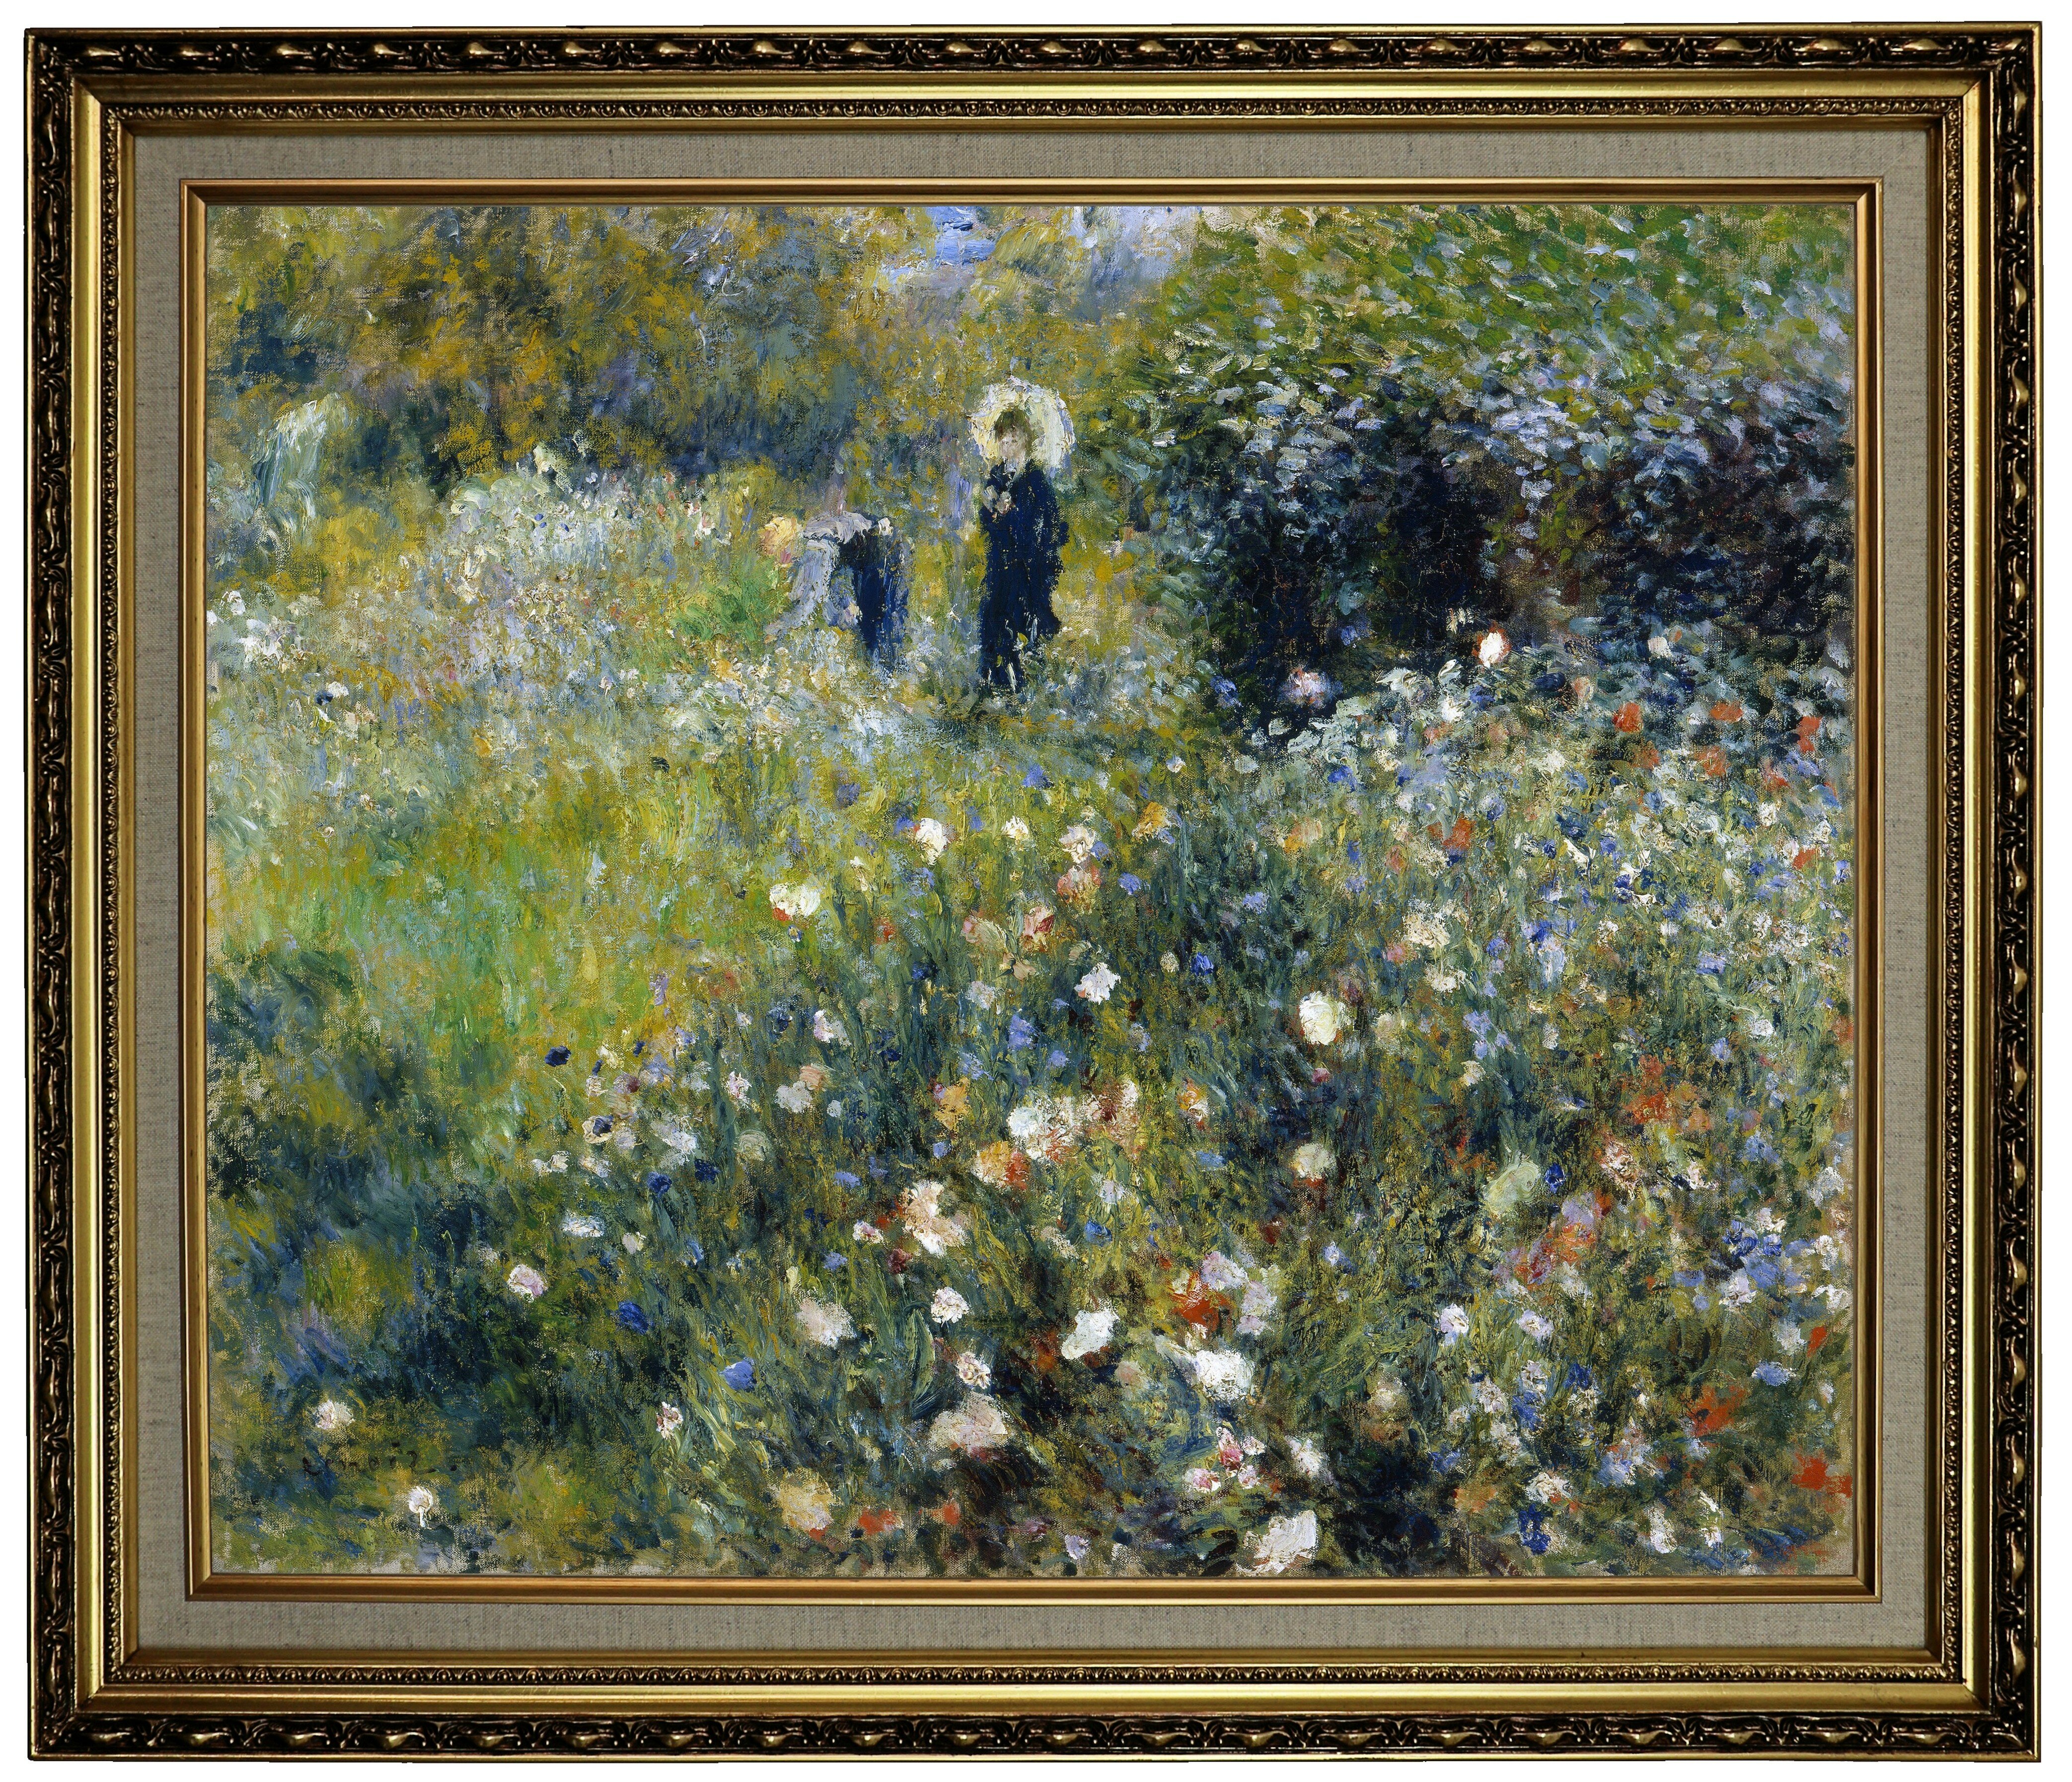 Vault W Artwork Woman With A Parasol In A Garden 1875 By Pierre Auguste Renoir Framed Oil Painting Print On Canvas Wayfair Ca